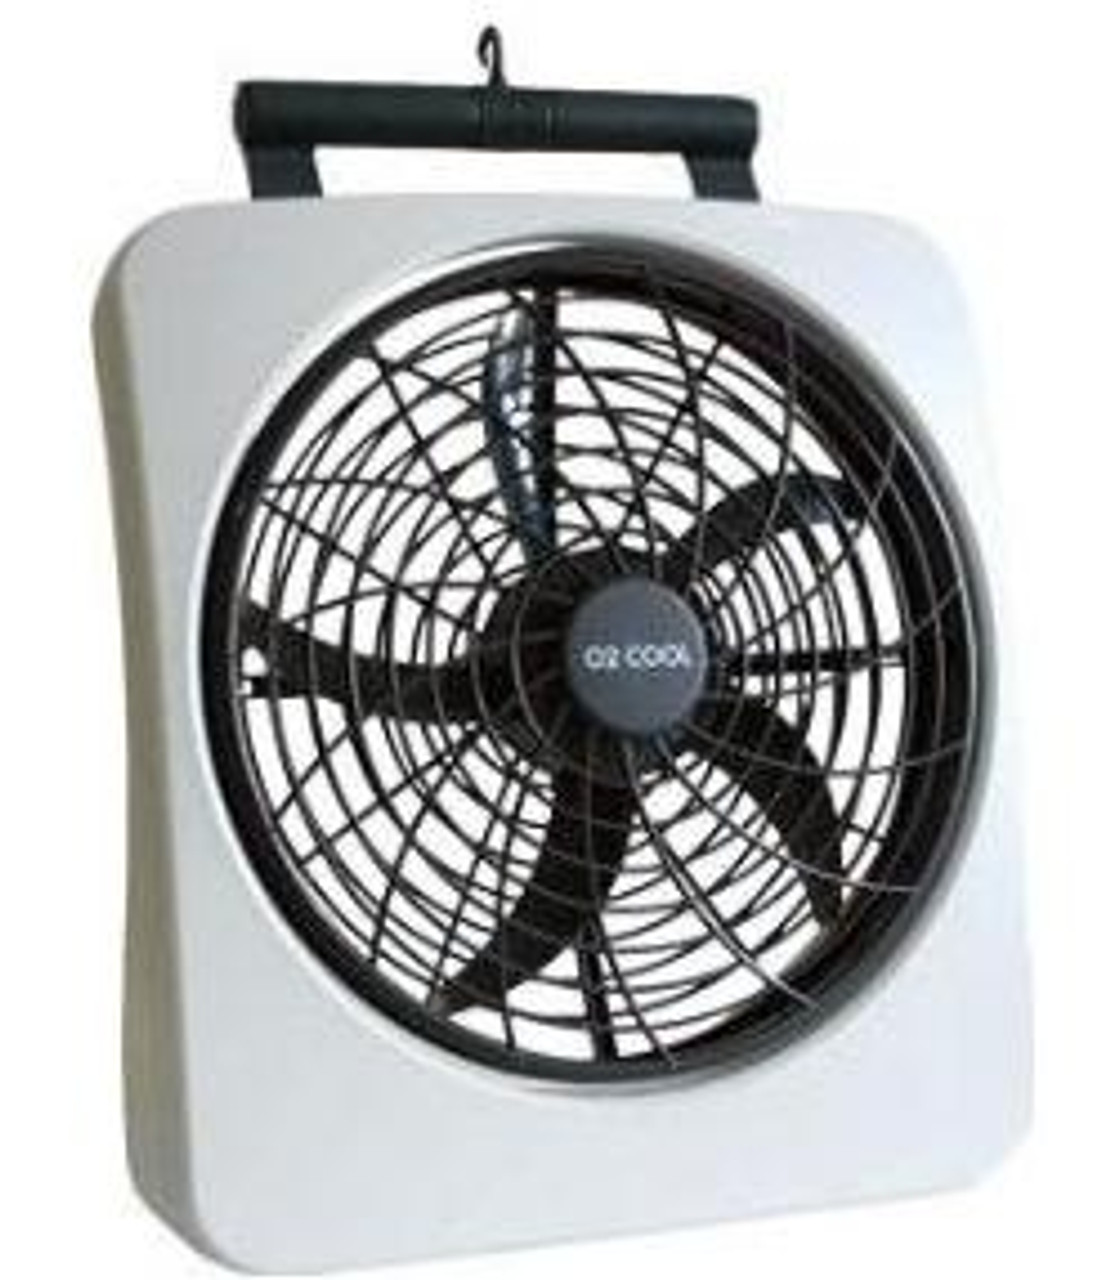 portable fan with remote